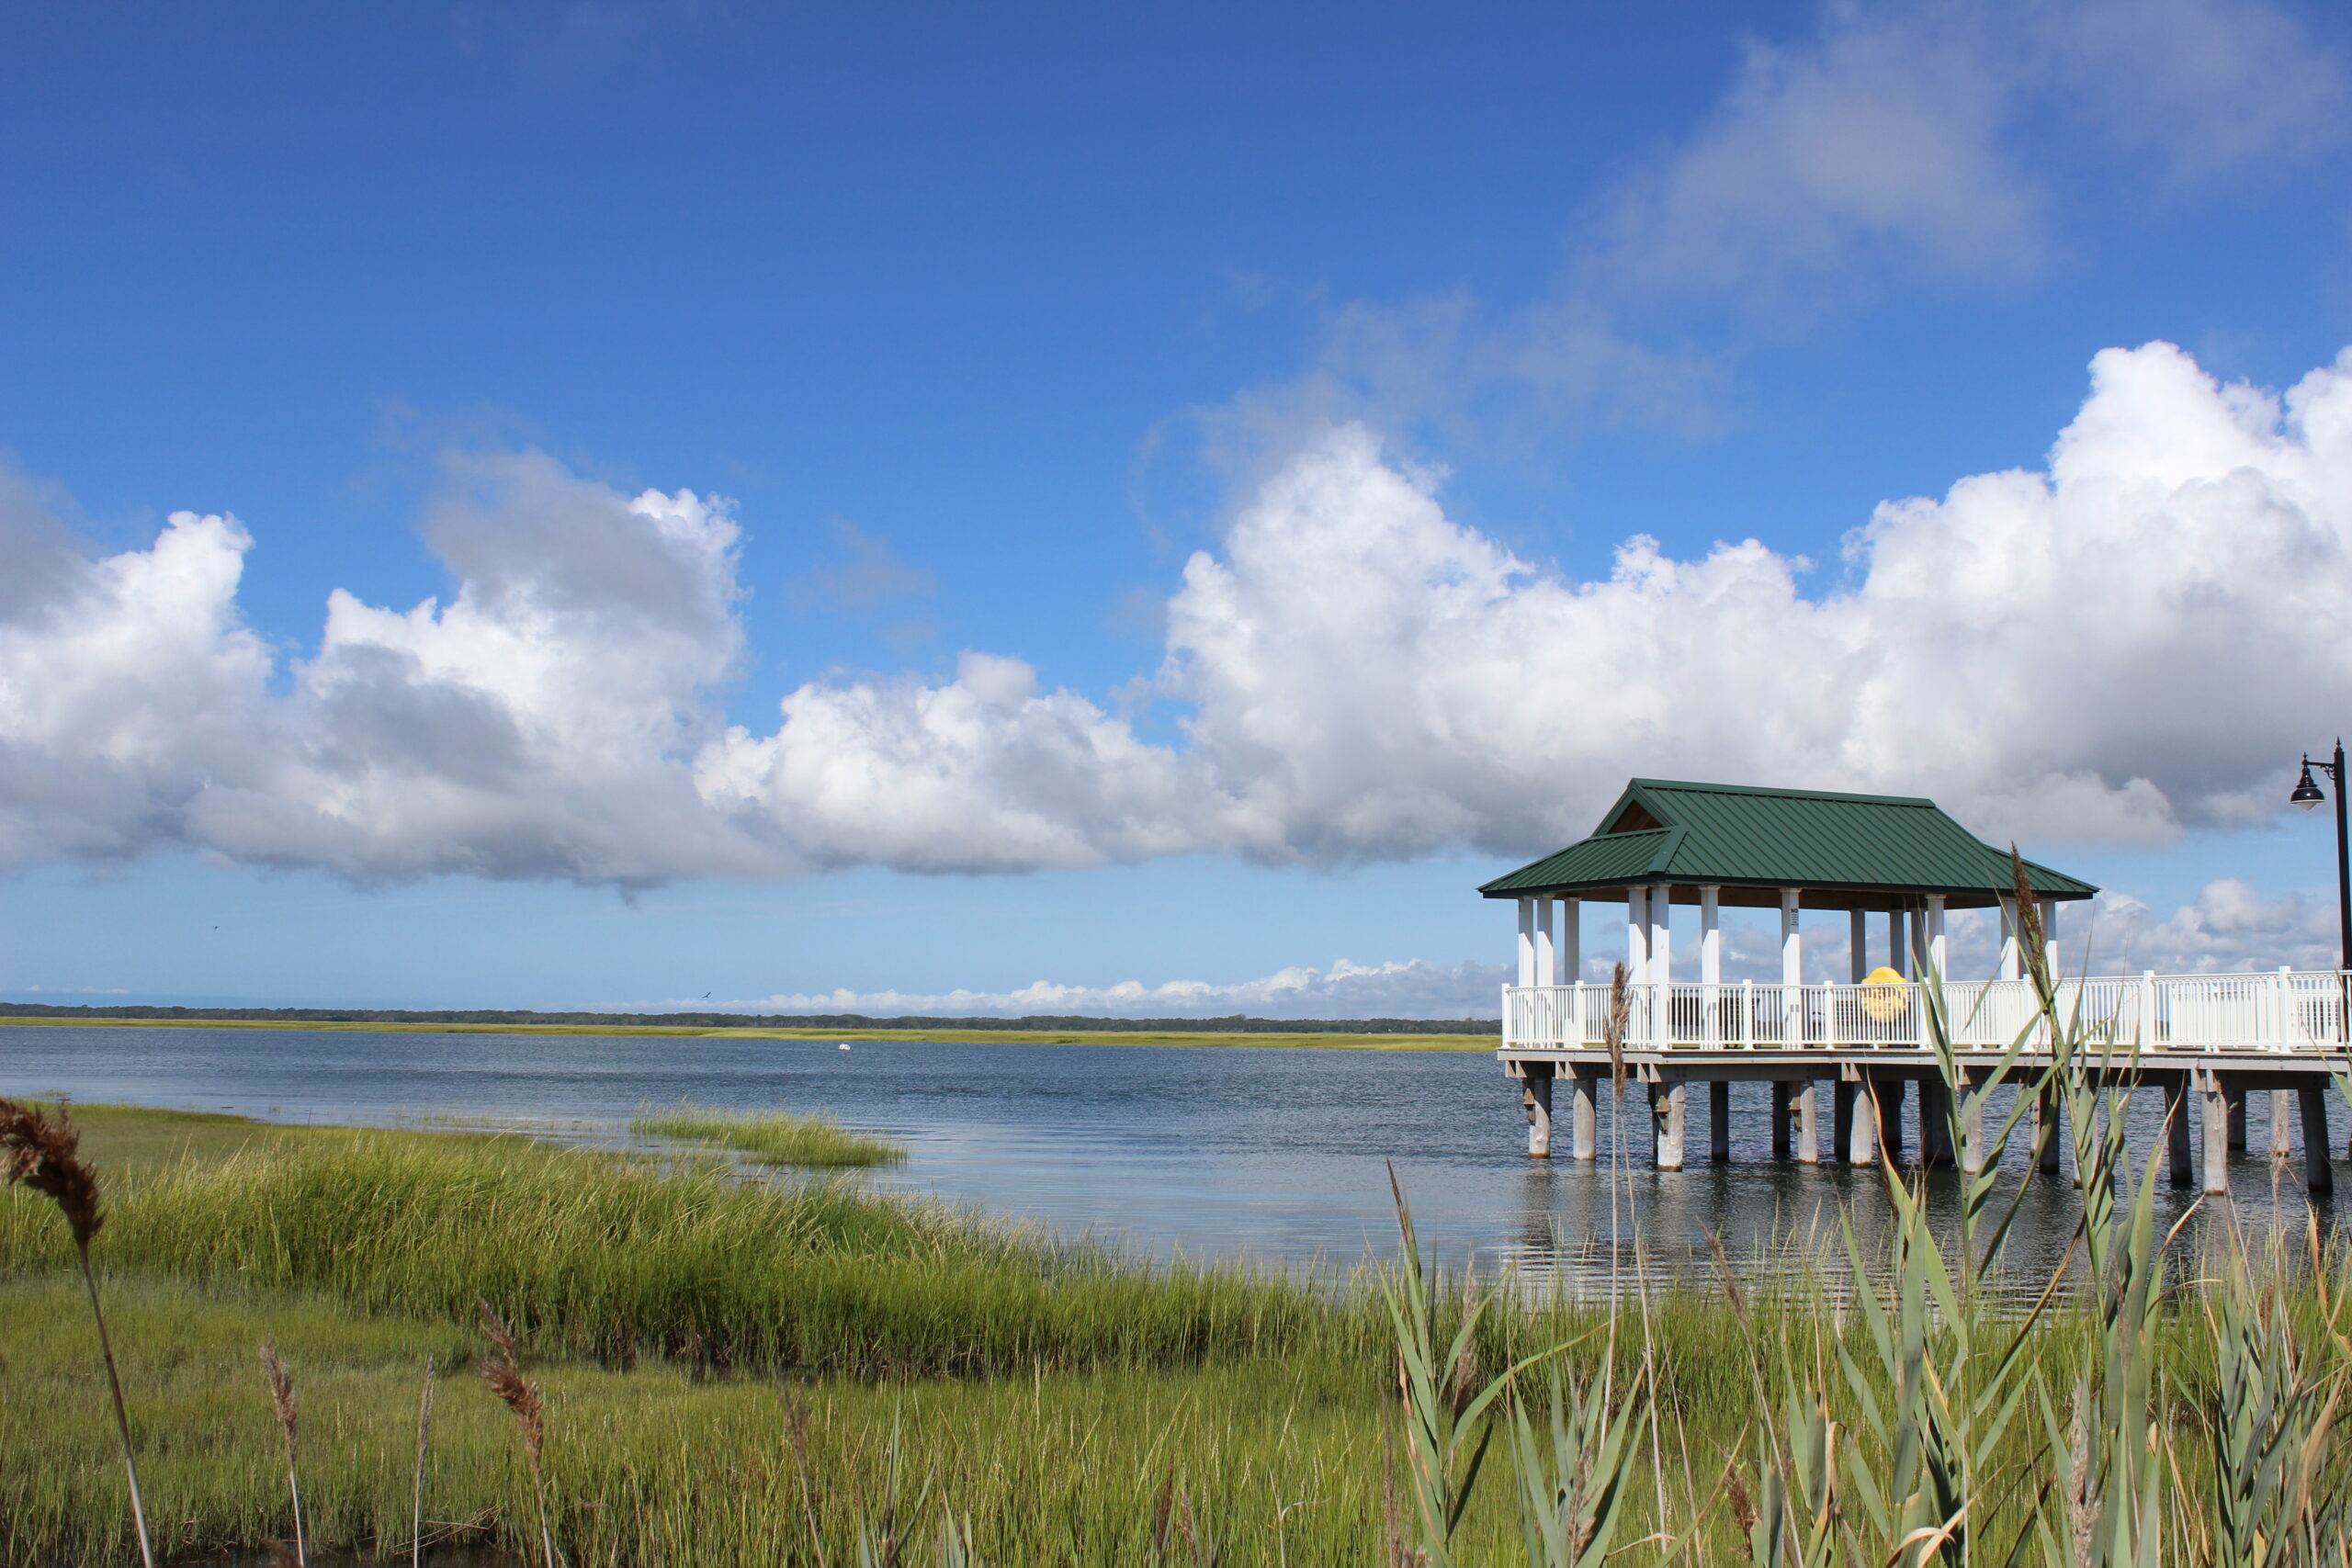 Dealy Field in Sea Isle City NJ - Extra - beautiful image of pier WIDE image